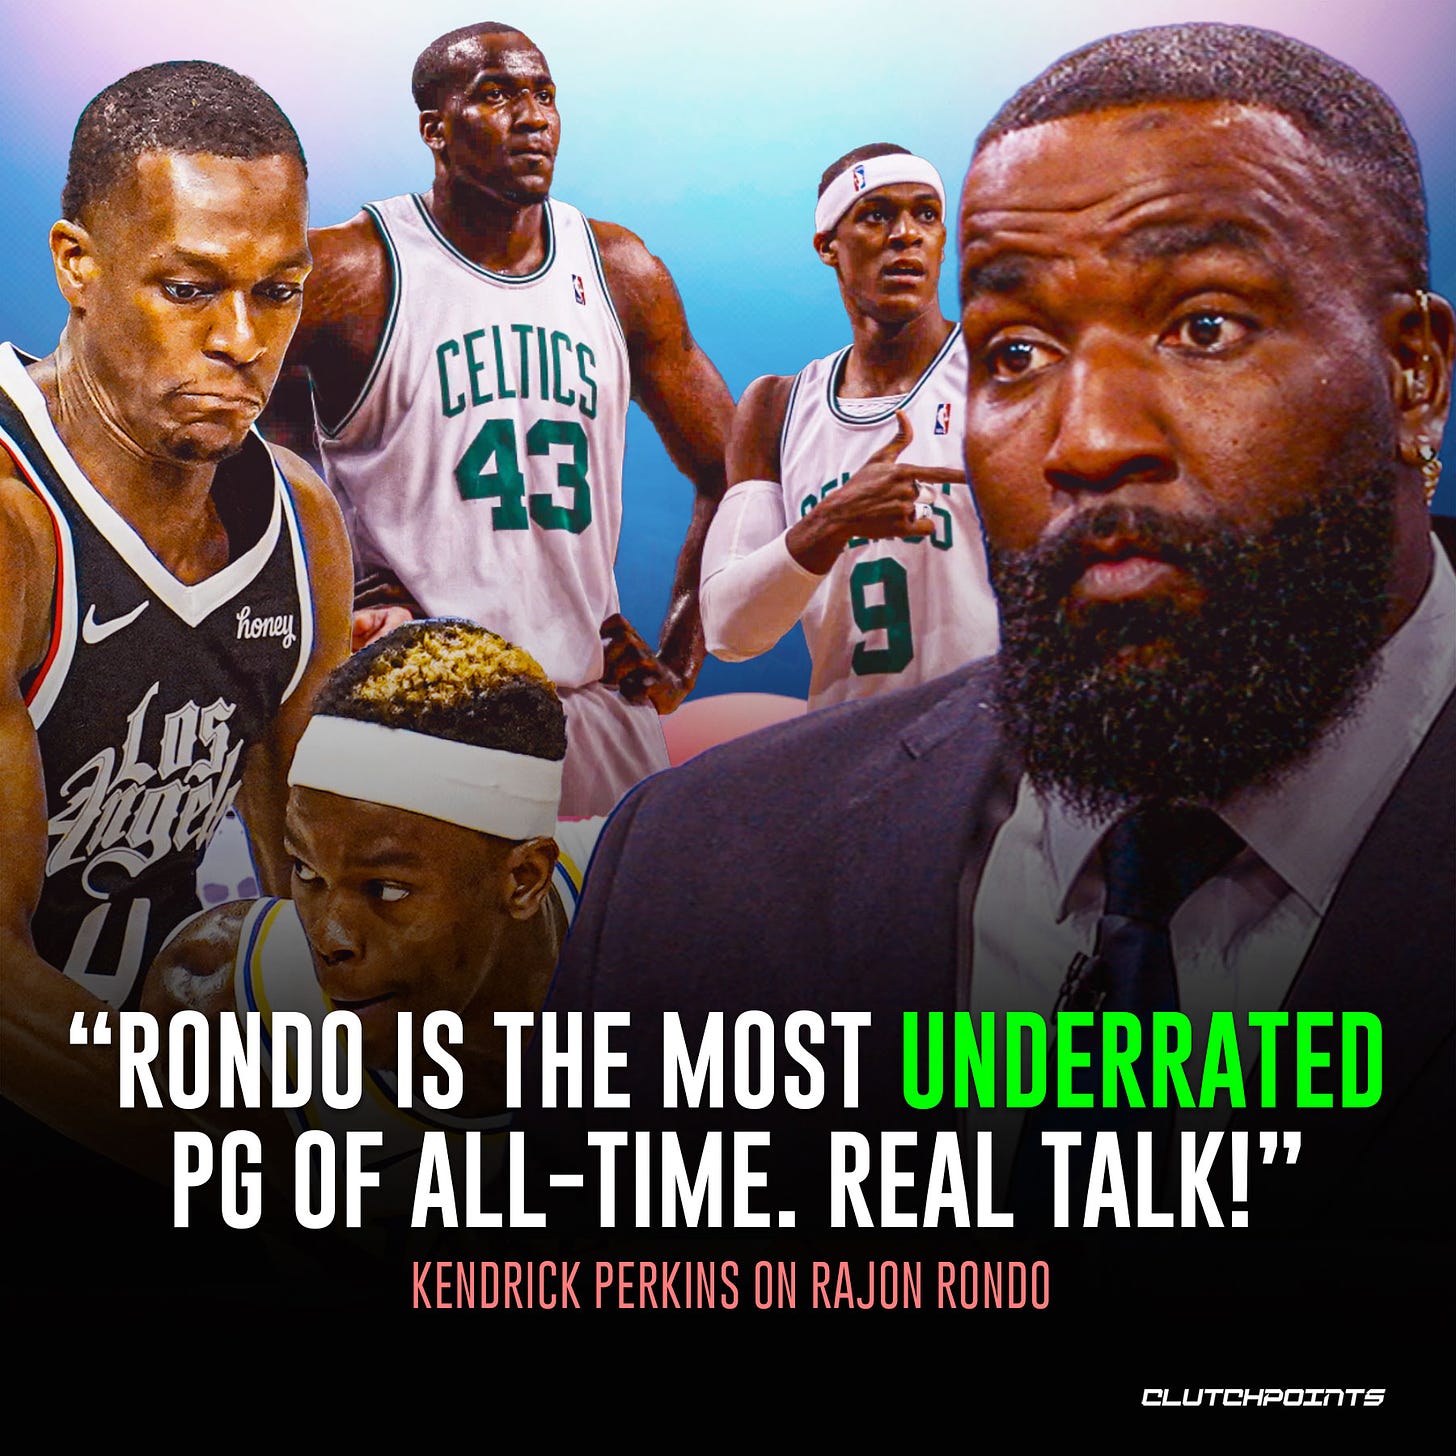 May be an image of 4 people and text that says 'CELTICS 43 honey "RONDO IS THE MOST UNDERRATED PG OF ALL-TIME. REAL TALK!" KENDRICK PERKINS ON RAJON RONDO CLUTCHPOINTS'